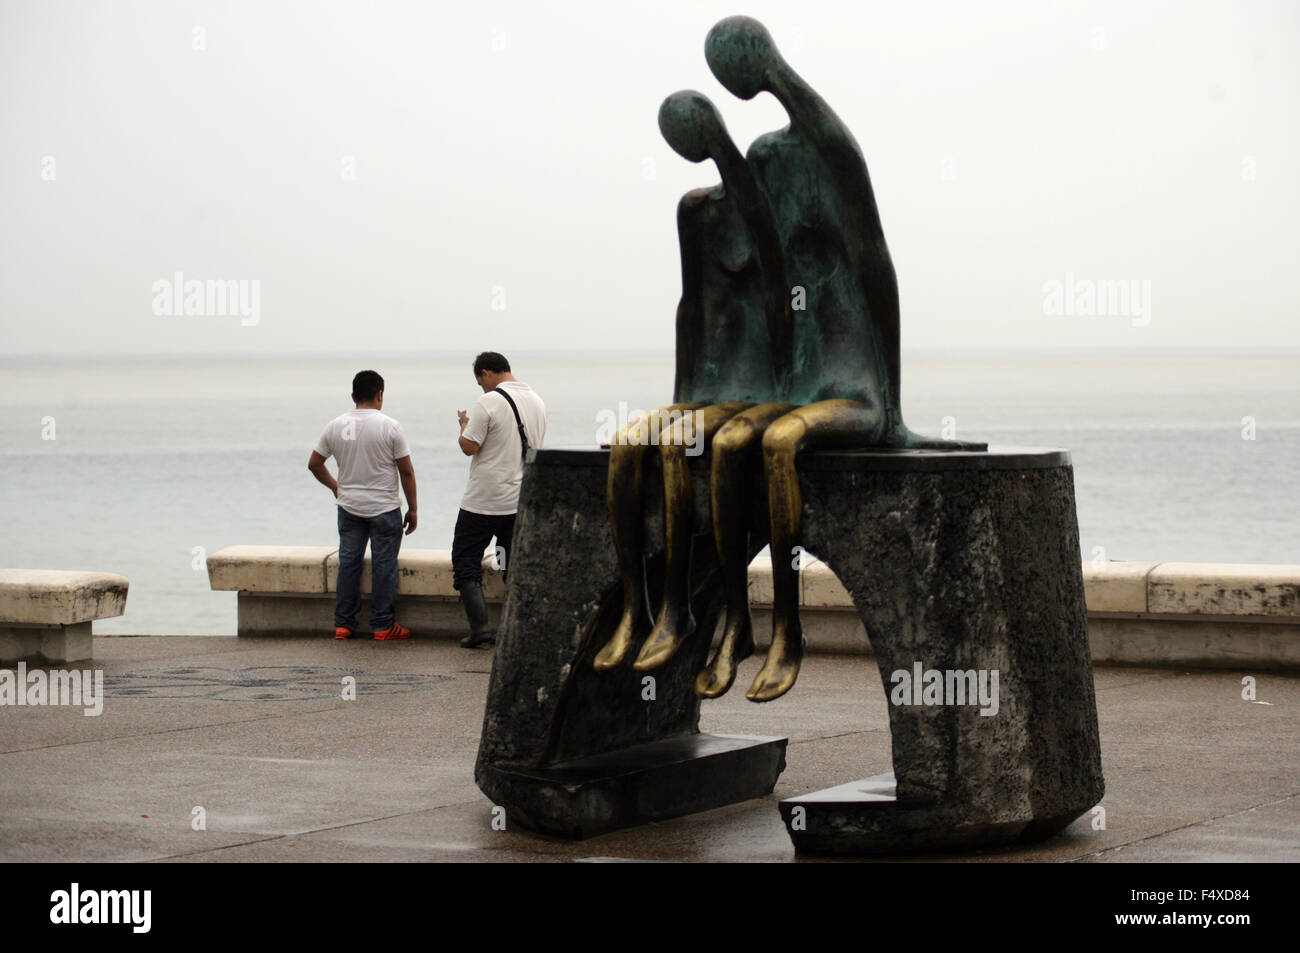 Puerto Vallarta, Mexico. 23rd Oct, 2015. People watch the sea, moments before the arrival of hurricane Patricia, in Puerto Vallarta, Jalisco state, Mexico, on Oct. 23, 2015. Hurricane Patricia made landfall on the Pacific coast of Mexico at around 5:40 p.m., local time, Friday, hitting the municipality of La Huerta in the state of Jalisco. Credit:  David Diaz/Xinhua/Alamy Live News Stock Photo